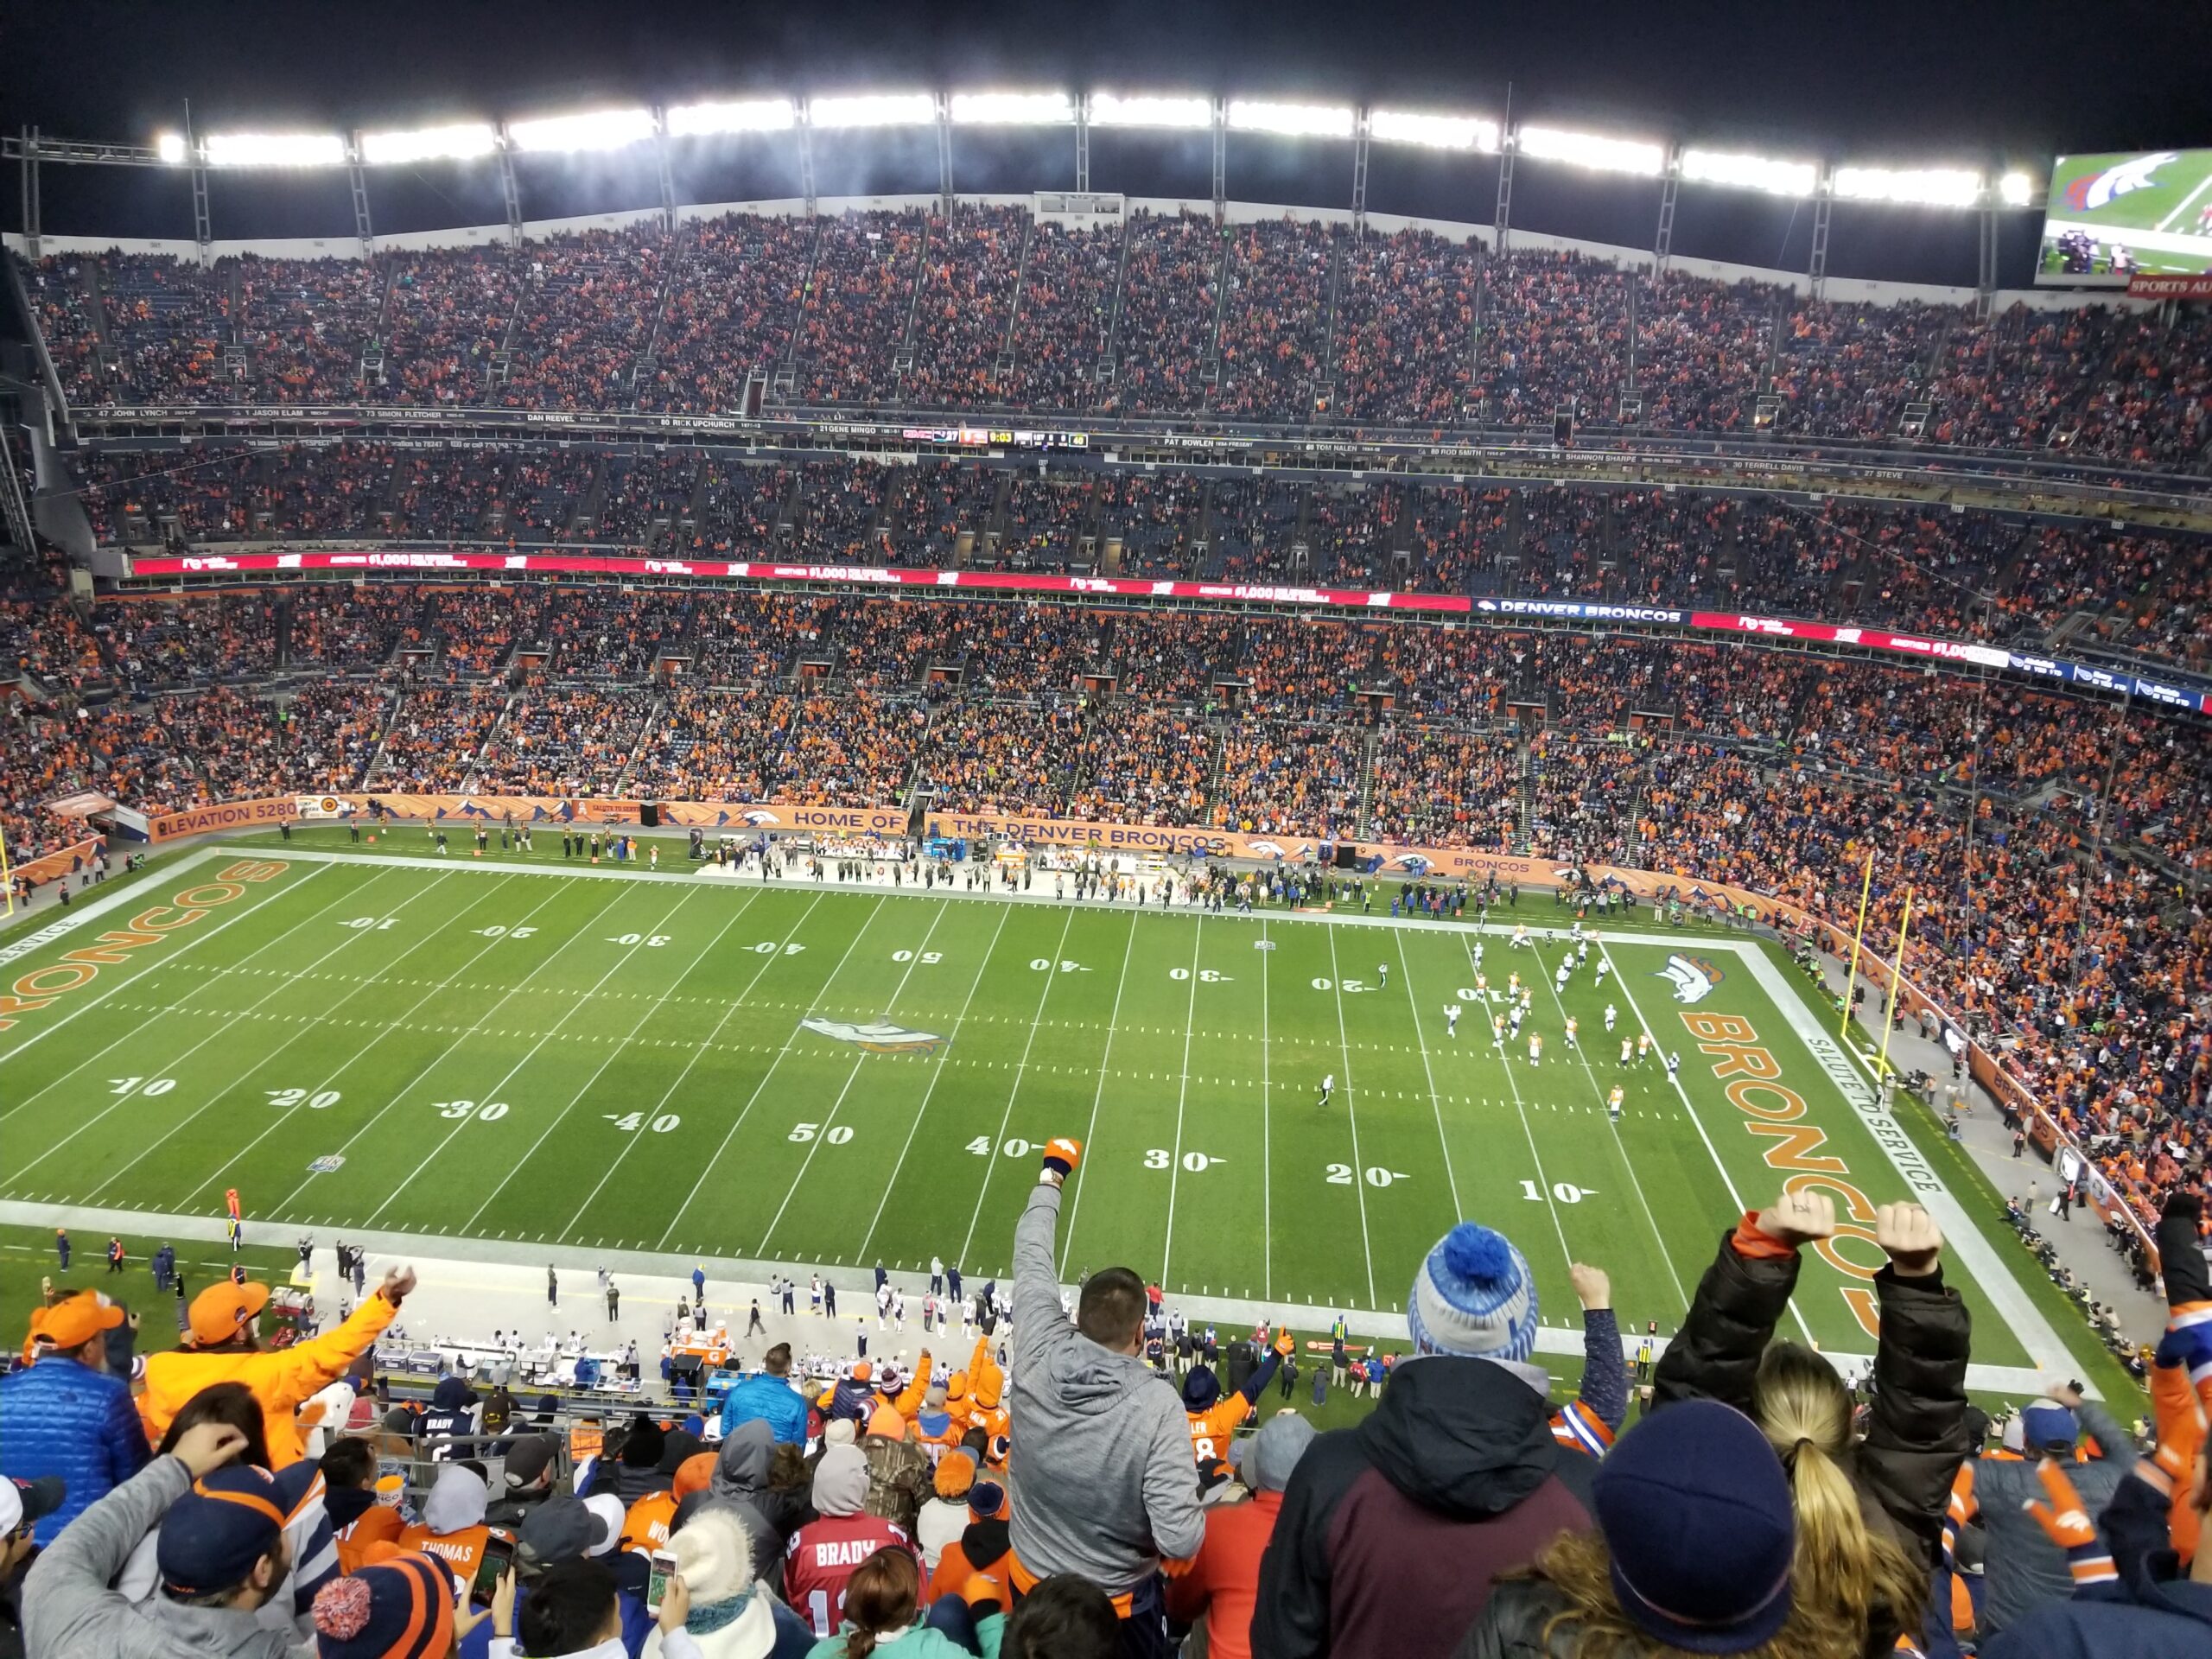 Guests cheer on the Denver Broncos at Mile High Stadium. Photo by: Matthew McGuire